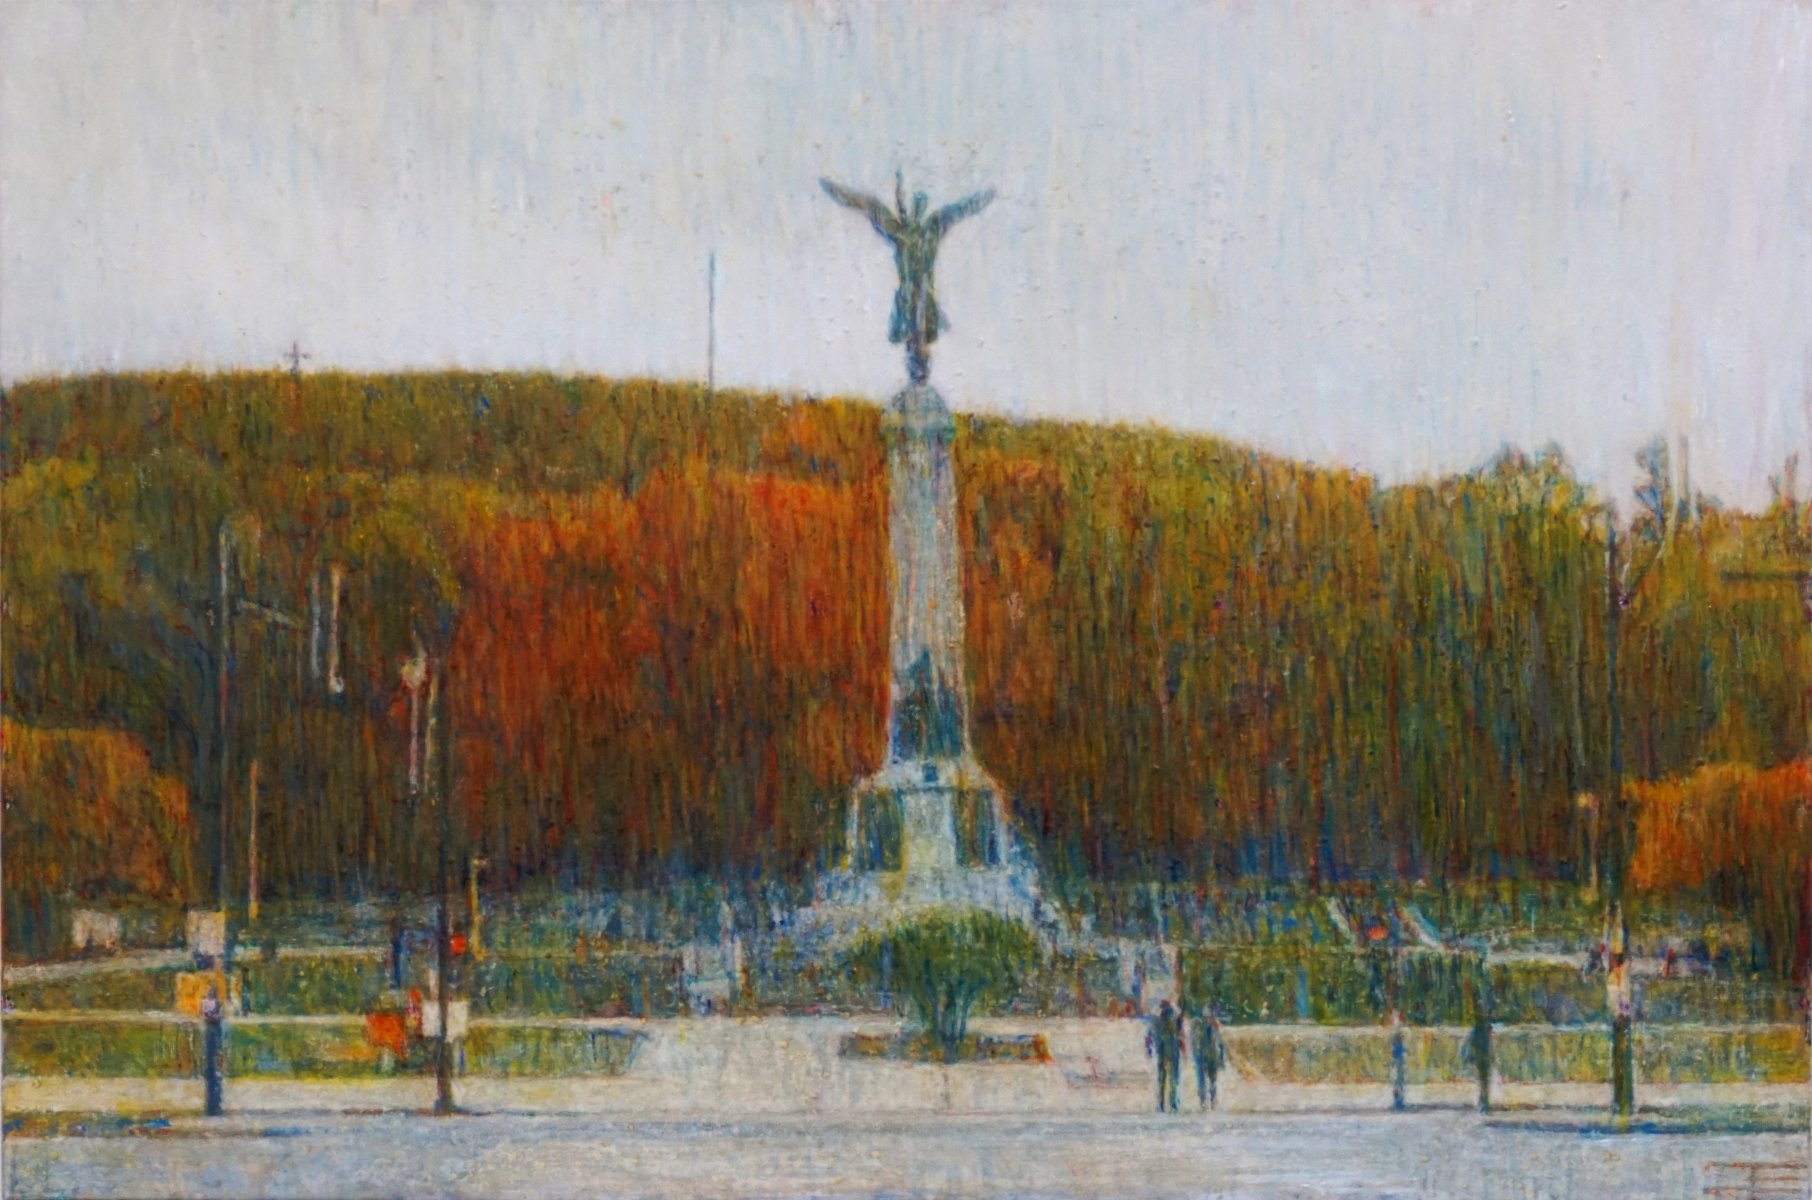 Oil painting by Jeremy Eliosoff, Monument, 2020, 36" x 24"